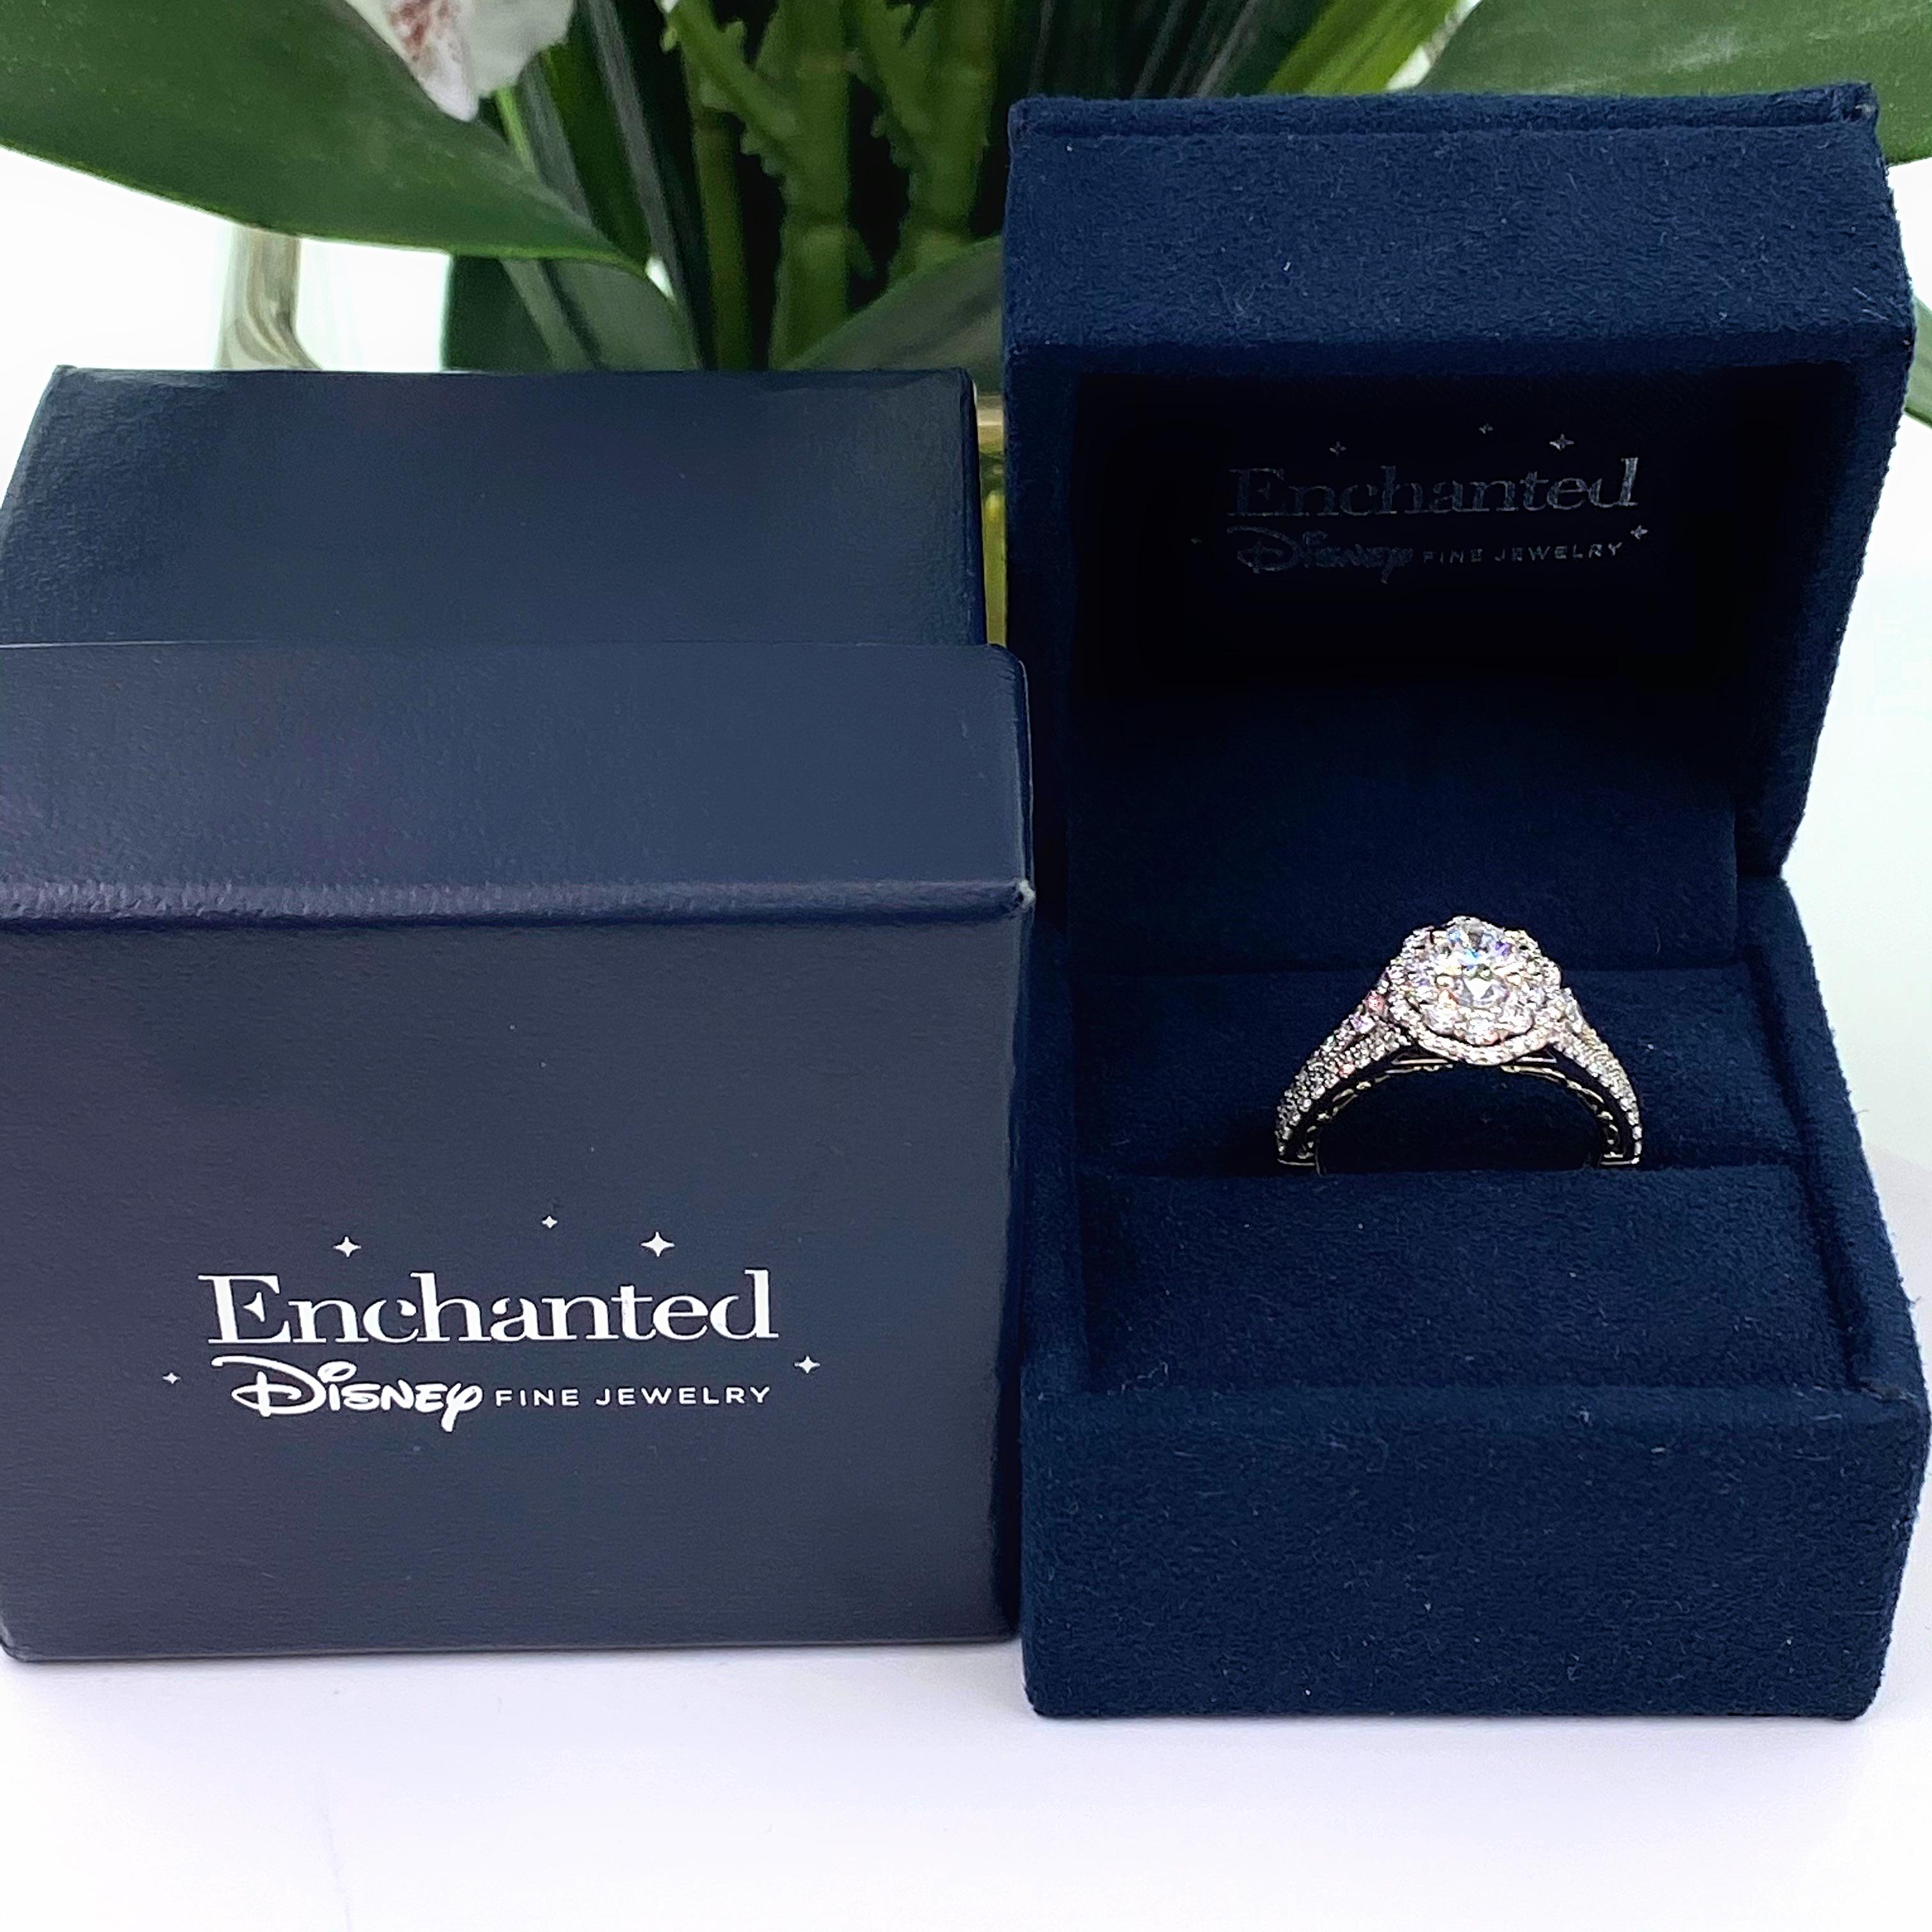 ENCHANTED DISNEY BELLE 1 1/4 TCW ENGAGEMENT RING
Style:  Double Frame Halo
Ref. number:  Zales#20319913
Metal:  14kt White Gold & Yellow Gold
Size / Measurements:  5 - sizable
TCW:  1 1/4 tcw ( 1.25 tcw )
Main Diamond:  Oval Diamond 0.50 cts 
Color